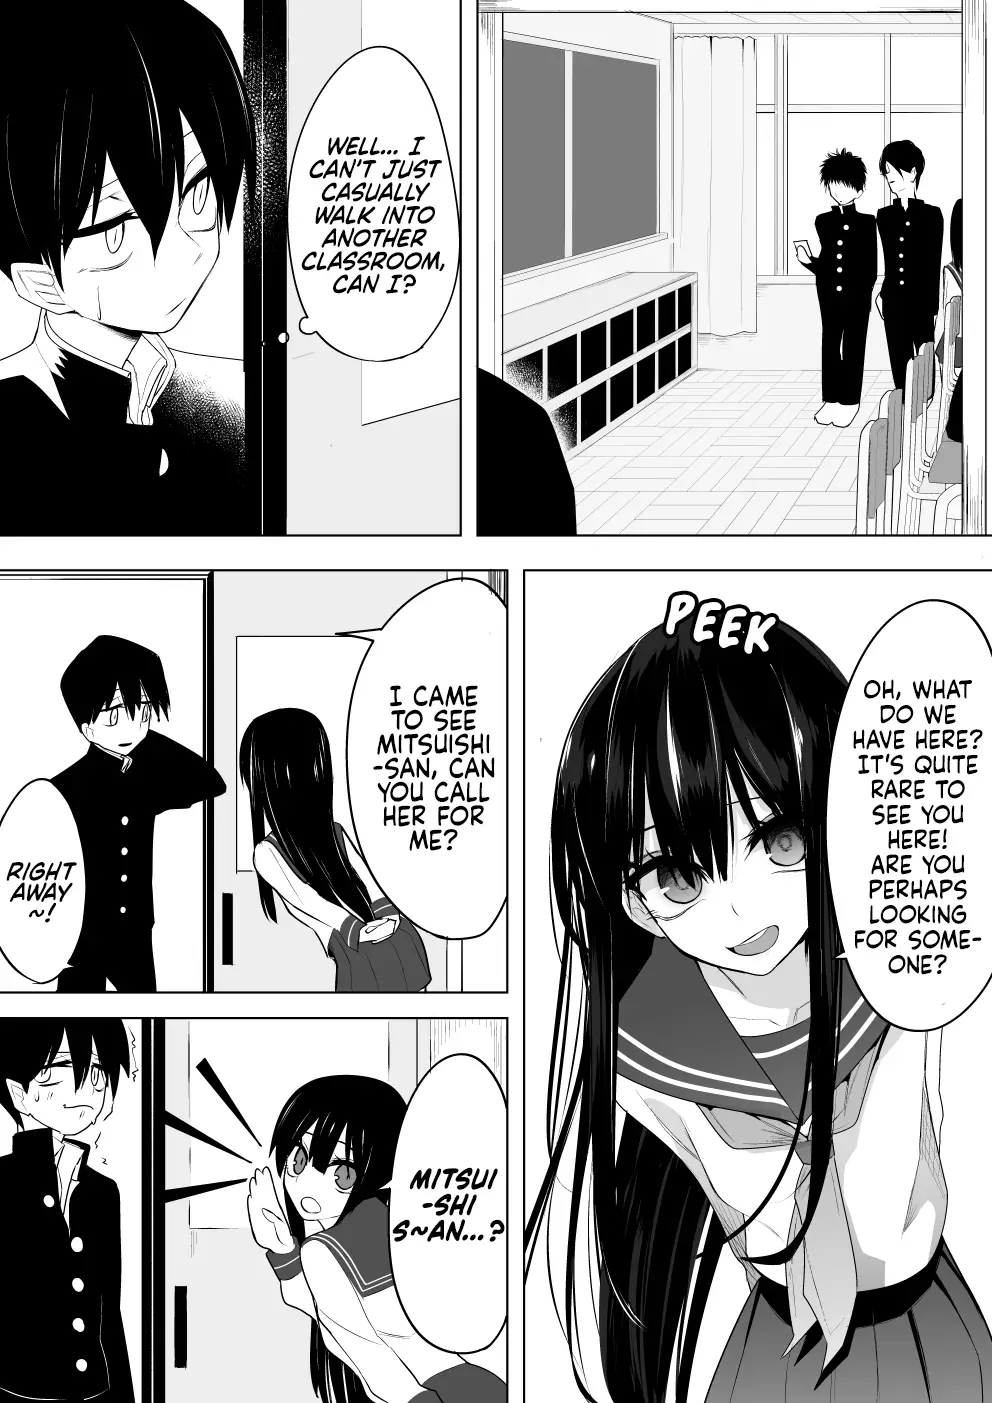 Mitsuishi-San Is Being Weird This Year - 10 page 2-e32c8541